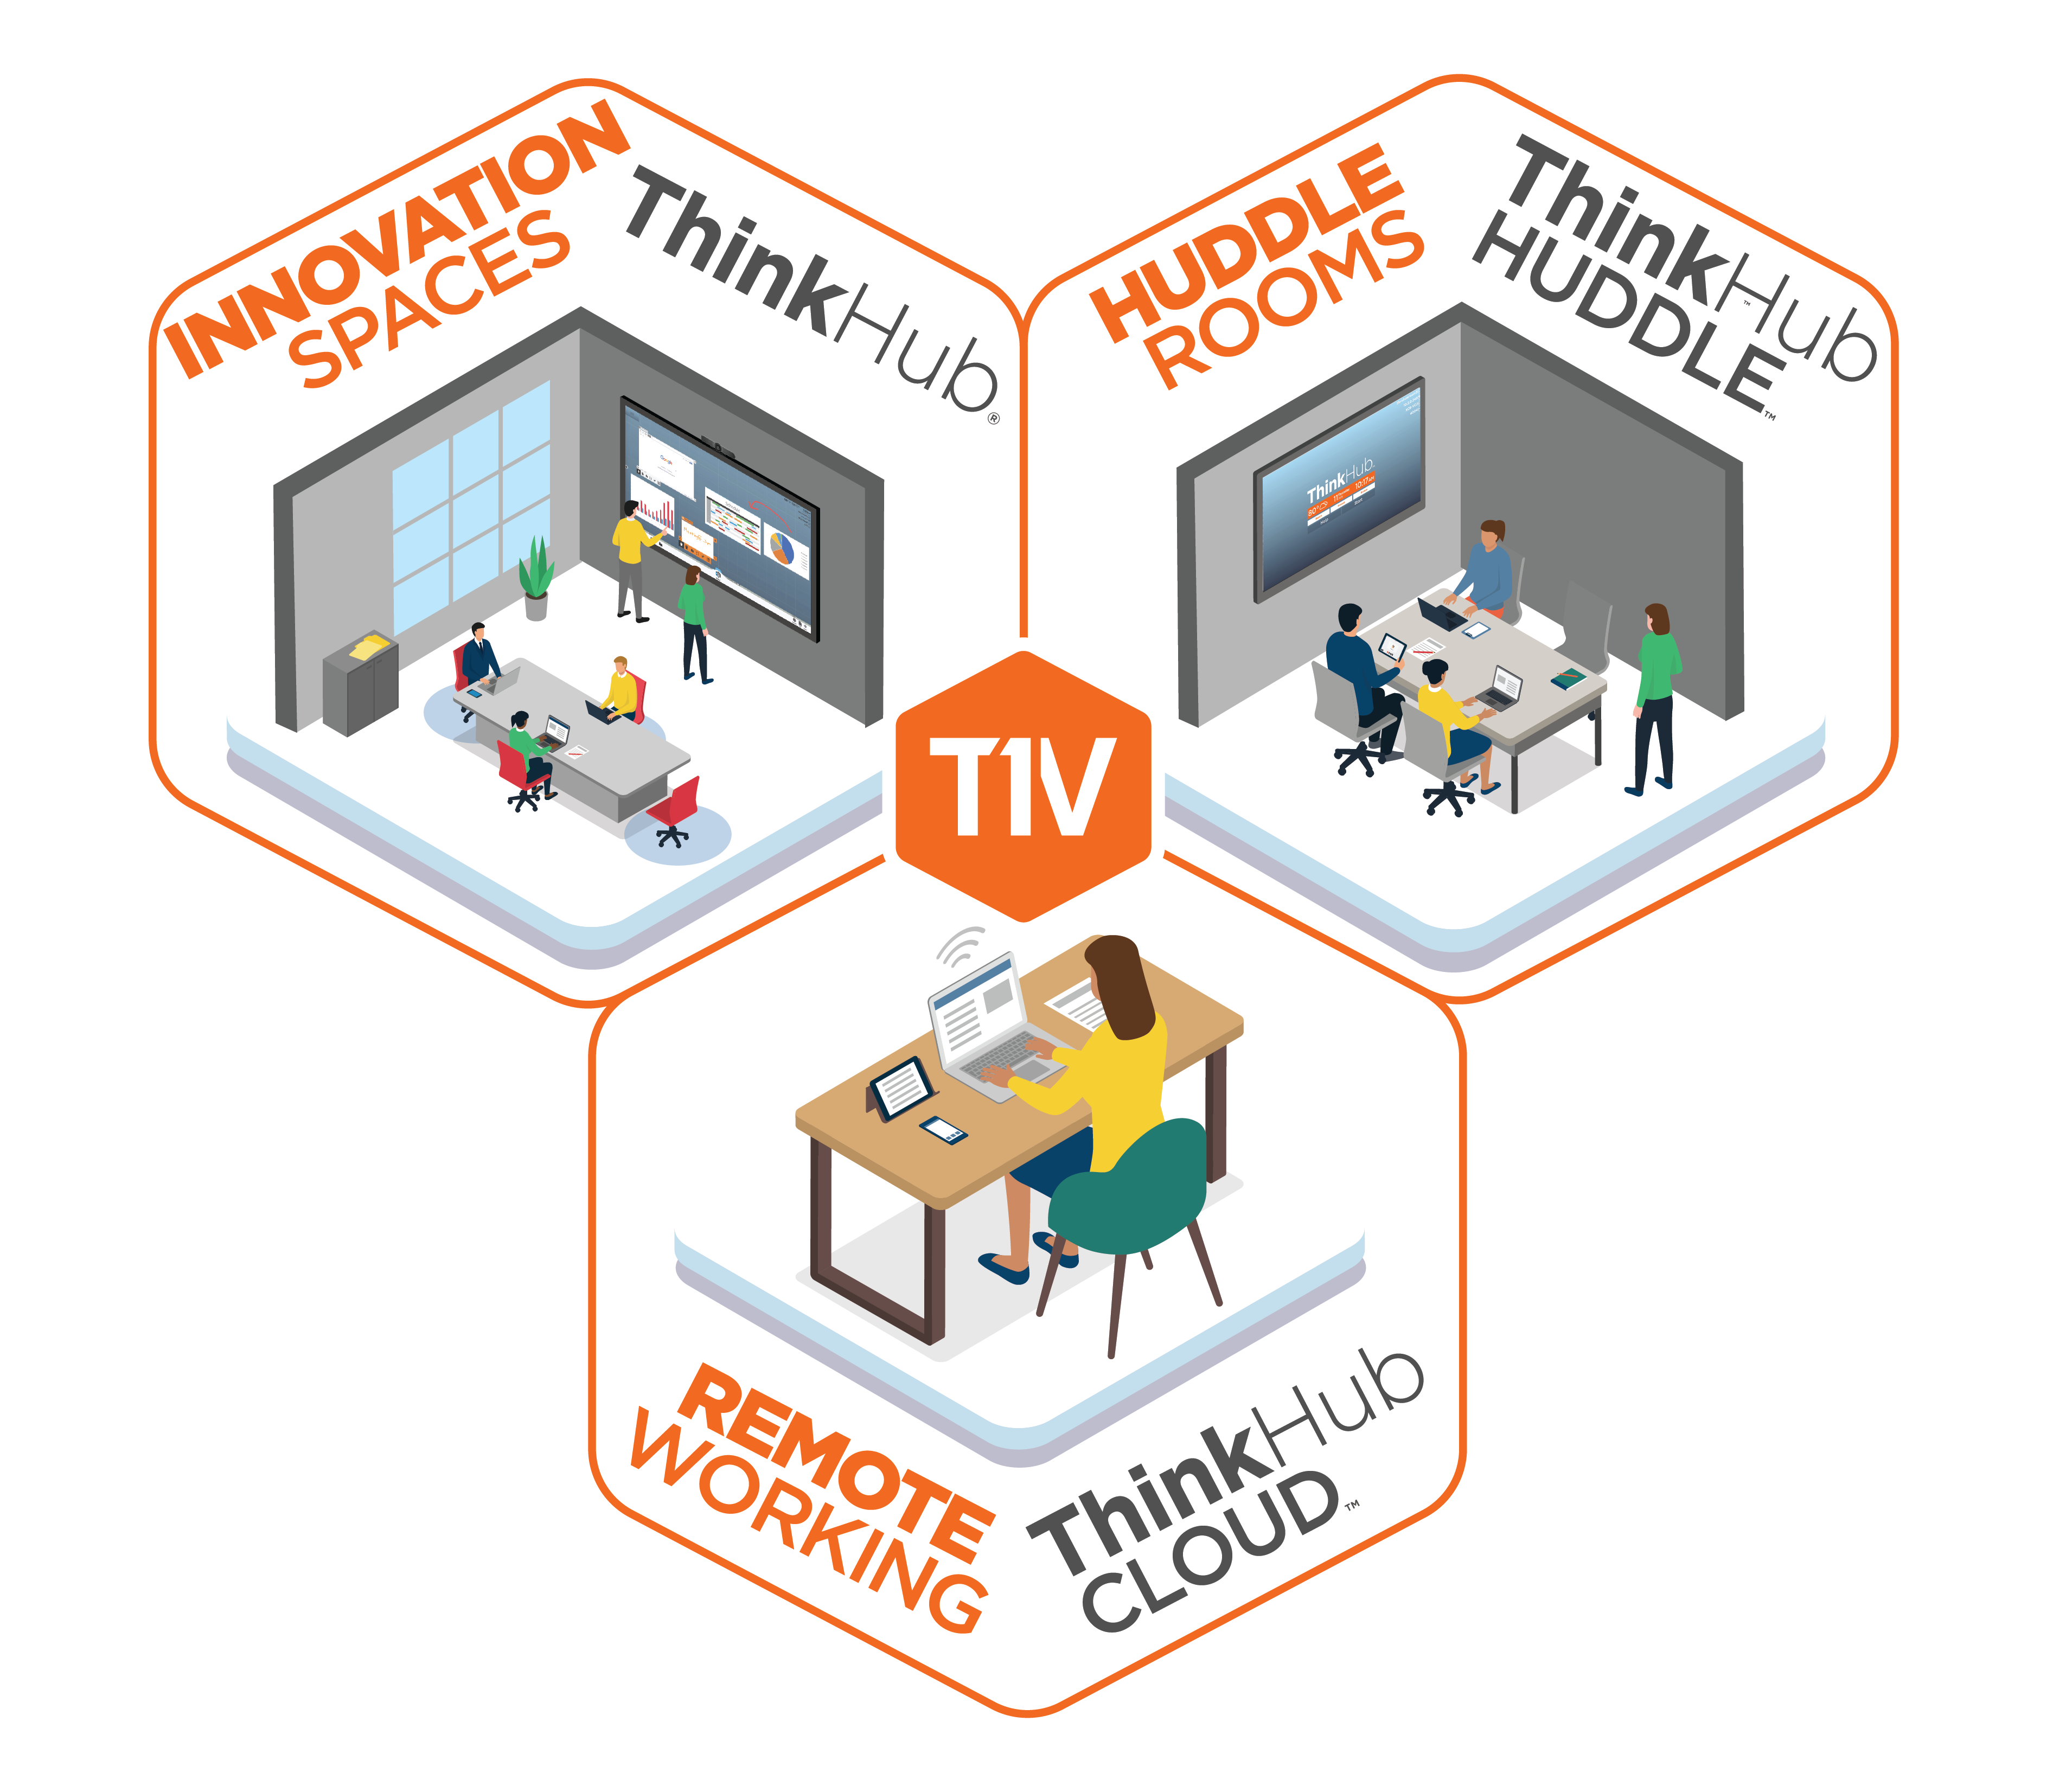 t1v-thinkhub-collaboration-software-different-meeting-spaces-for-hybrid-work-with-transparent-background